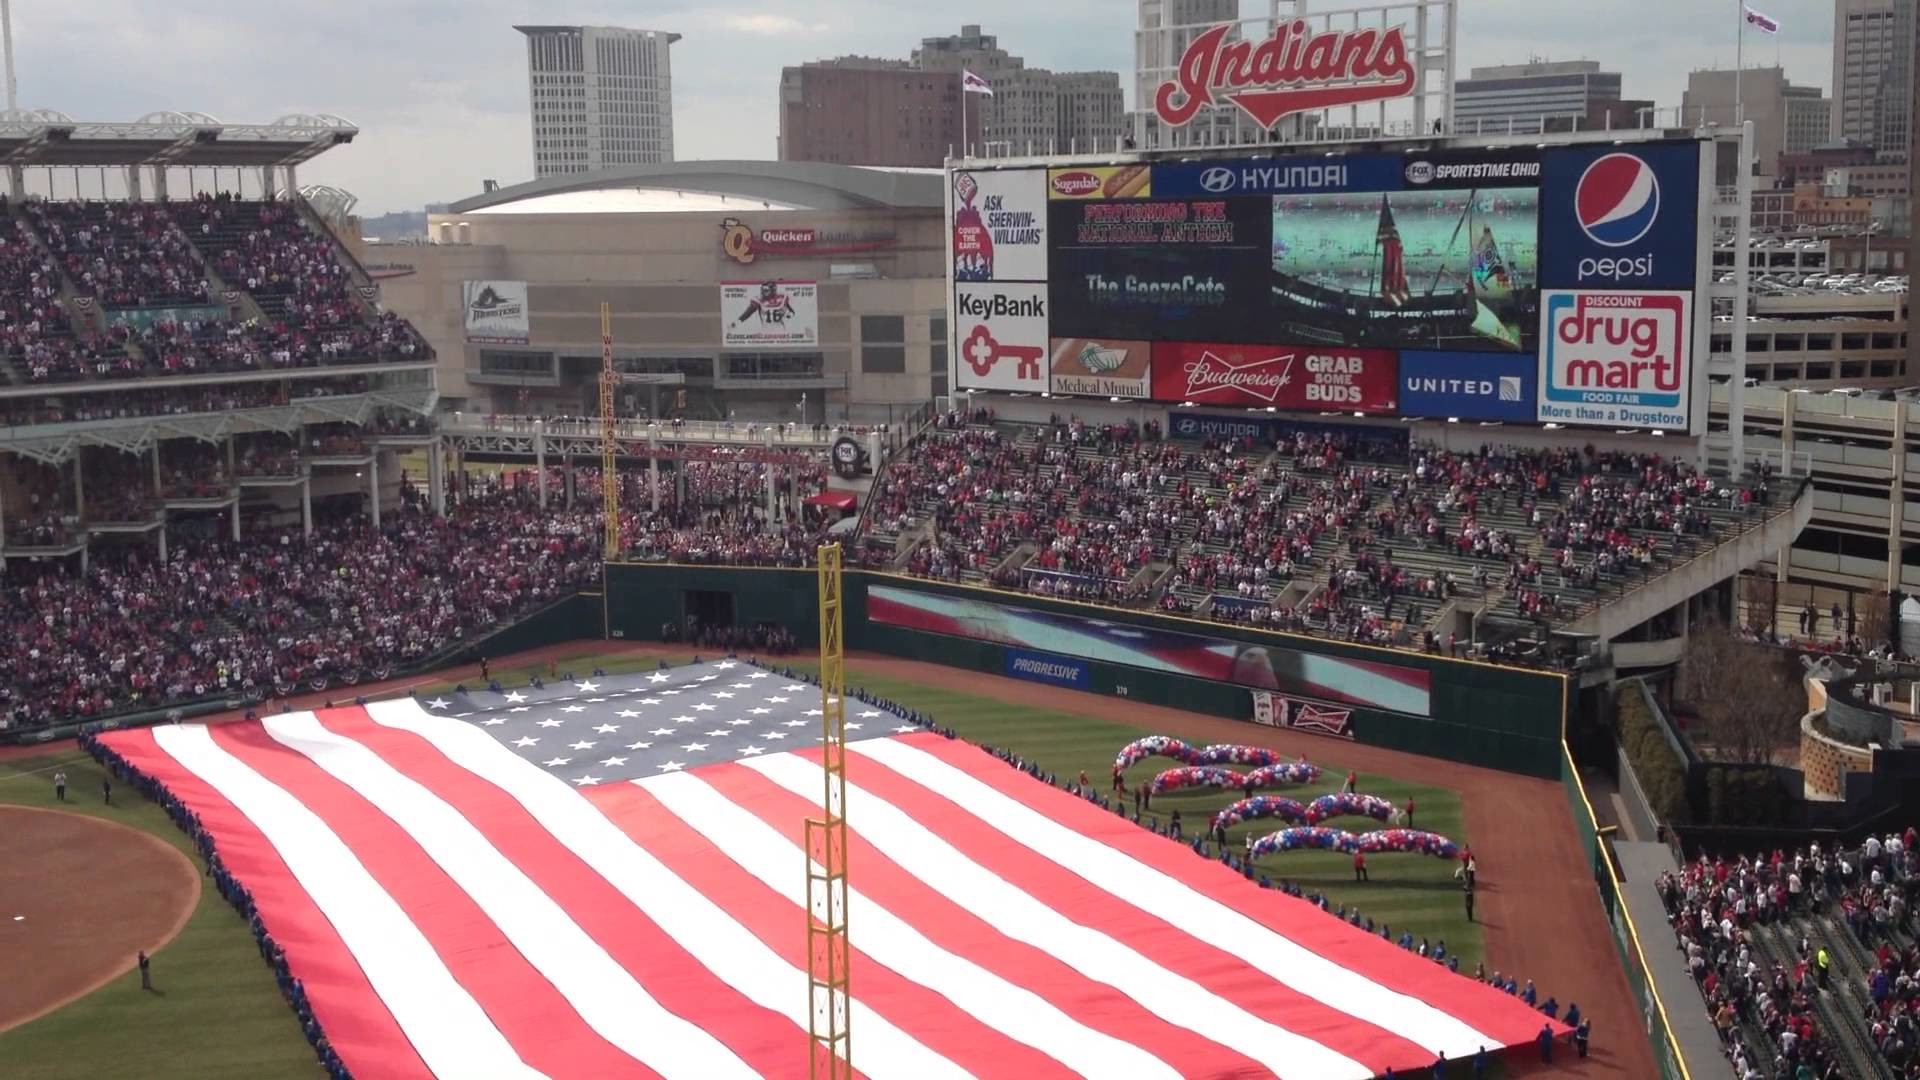 1920x1080 The National Anthem At The 2013 Cleveland Indians Home Opener